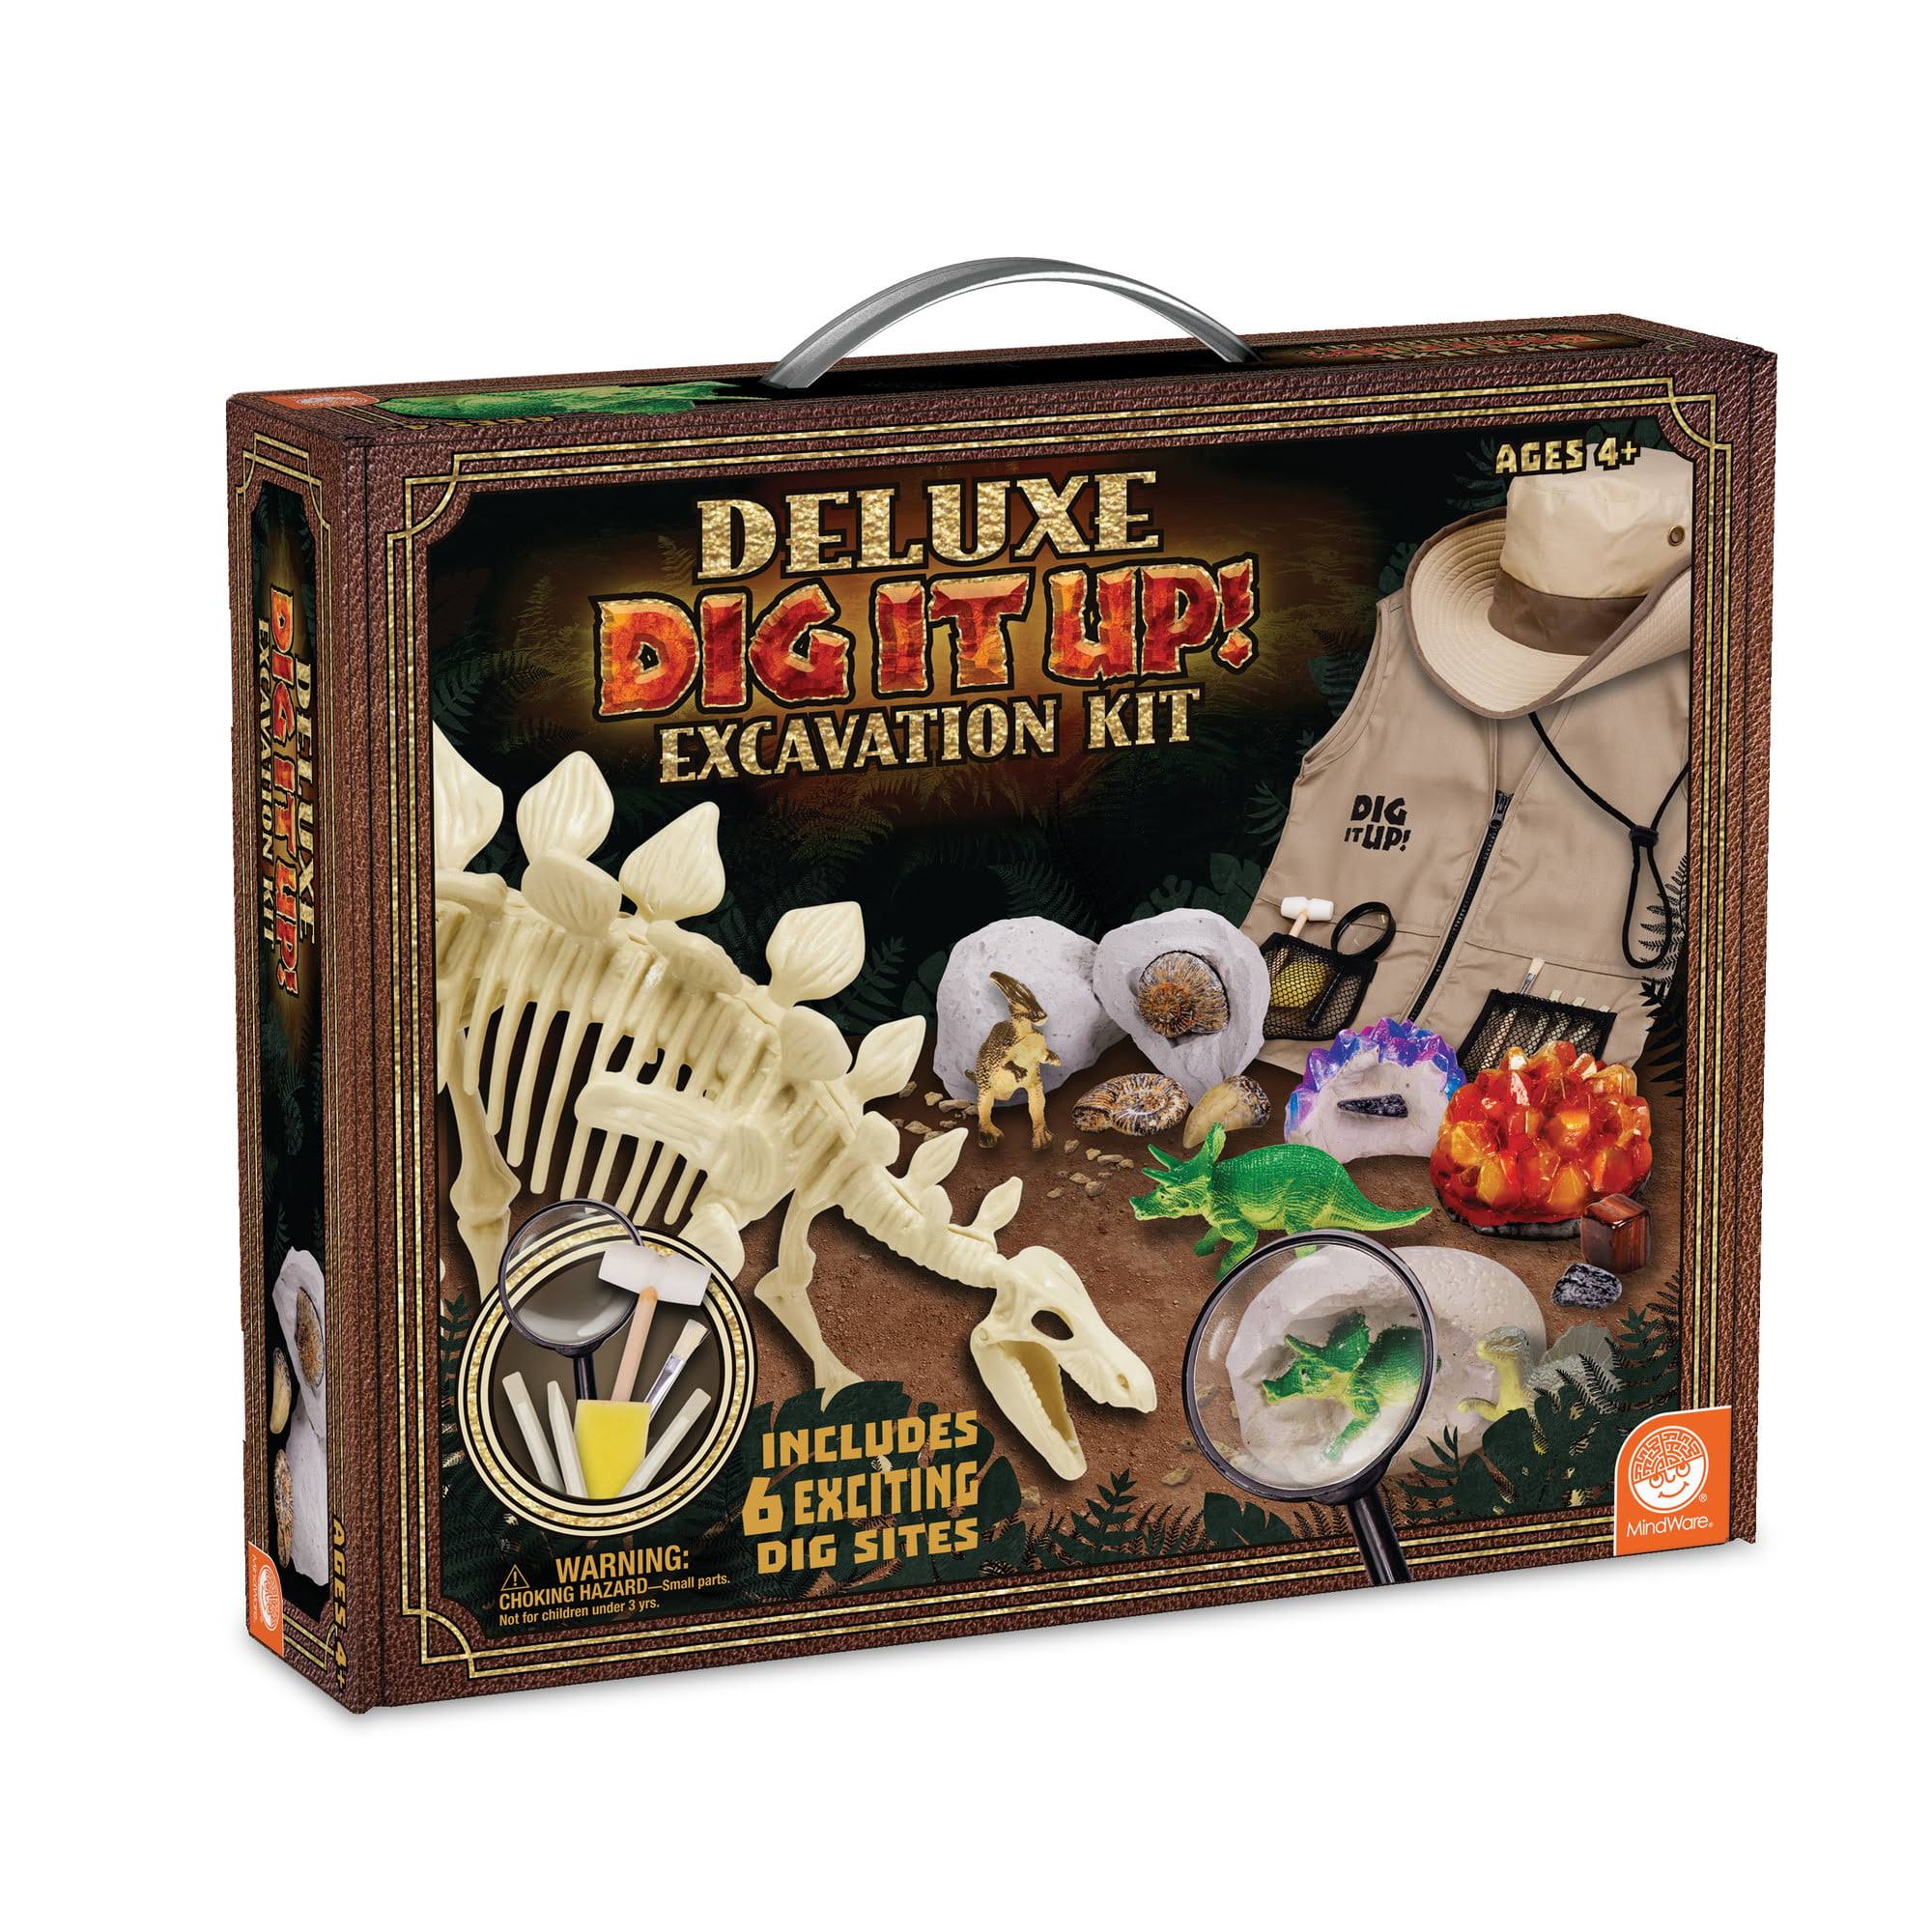 Dig It Up! Deluxe Excavation Kit from MindWare